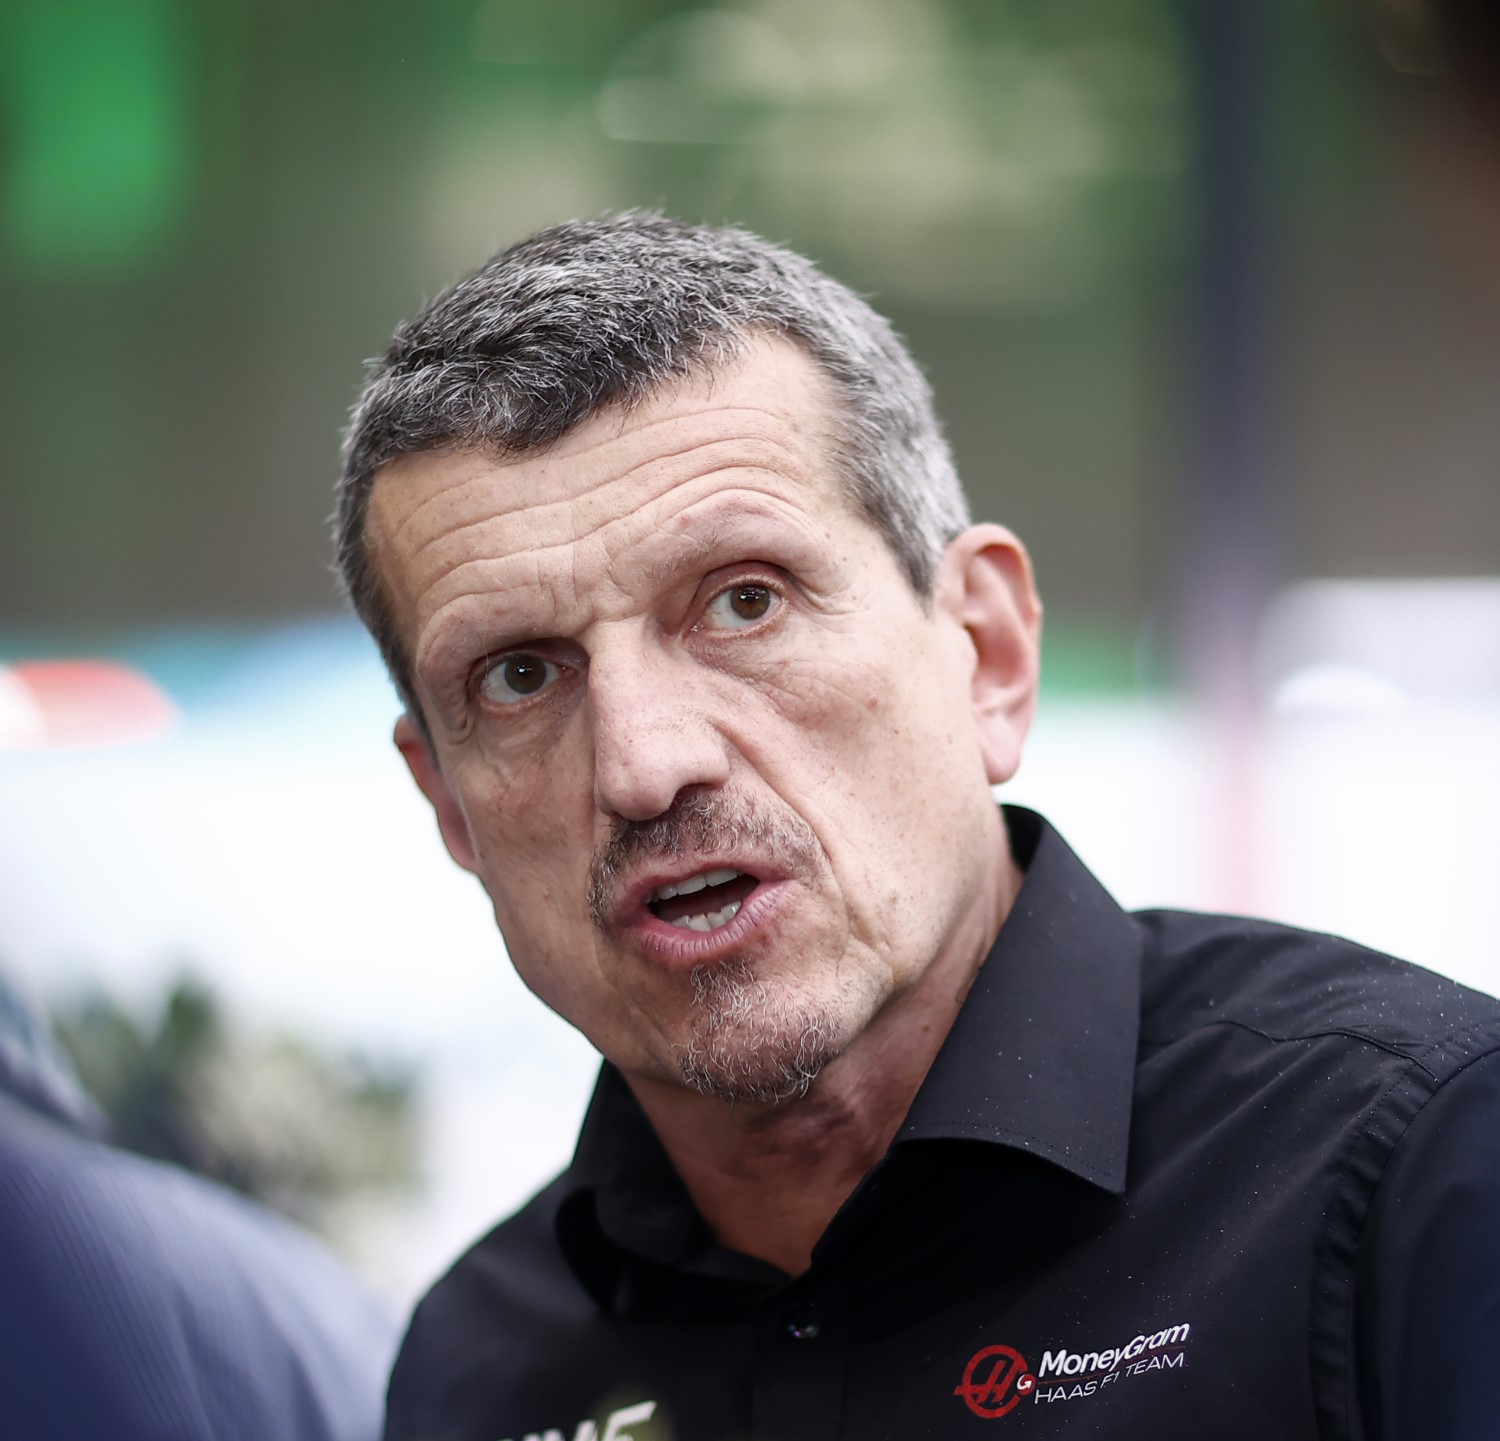 Guenther Steiner, former Team Principal, Haas F1 Team during the Saudi Arabian GP at Jeddah Street Circuit on Thursday March 16, 2023 in Jeddah, Saudi Arabia. (Photo by Andy Hone / LAT Images)